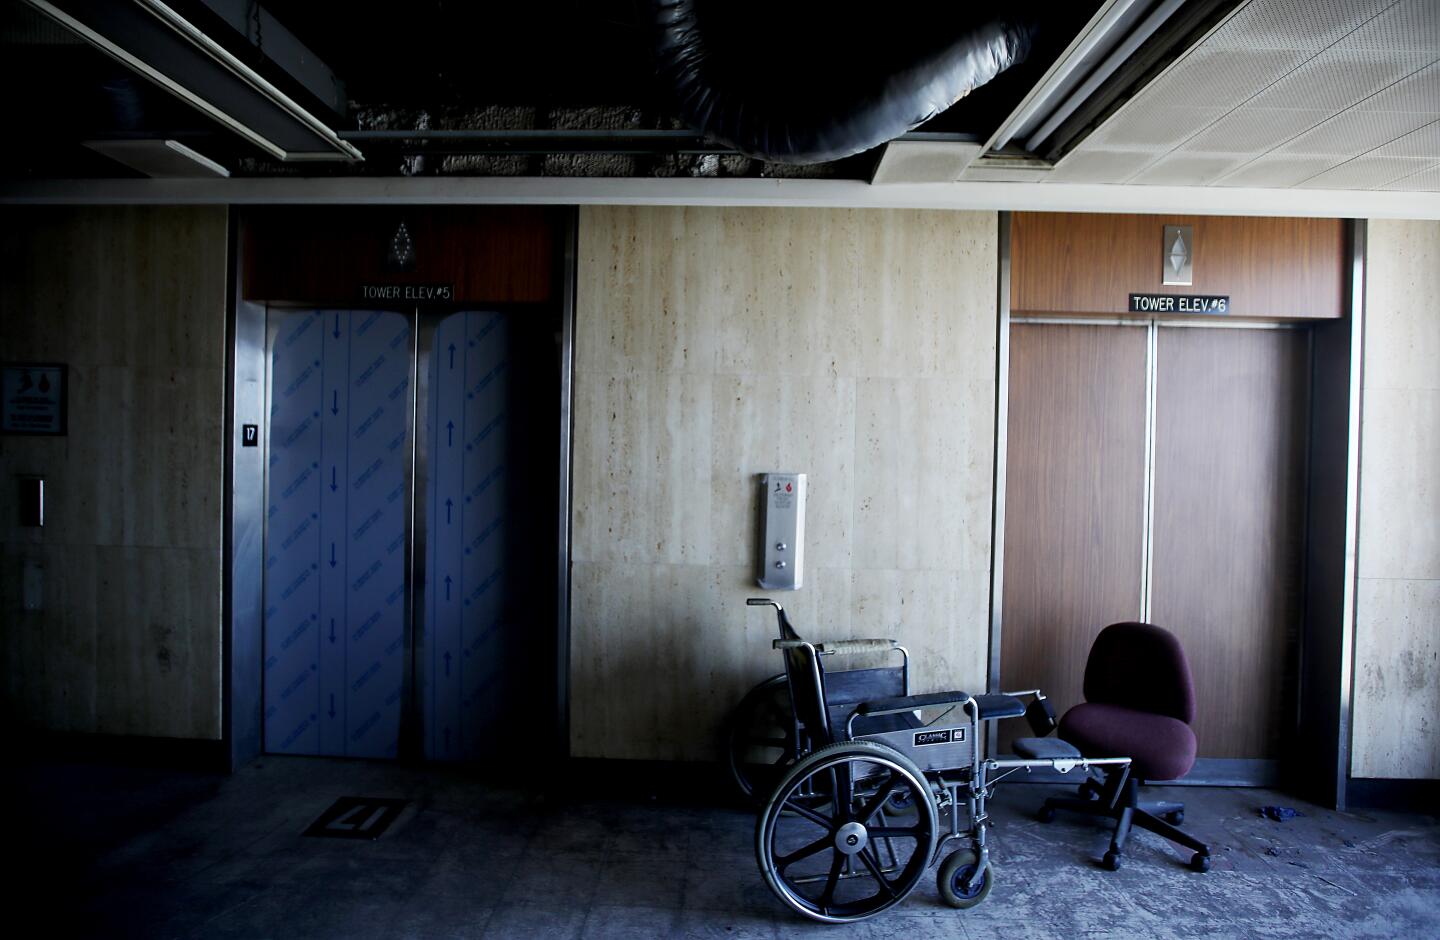 An abandoned wheelchair inside the General Hospital building.